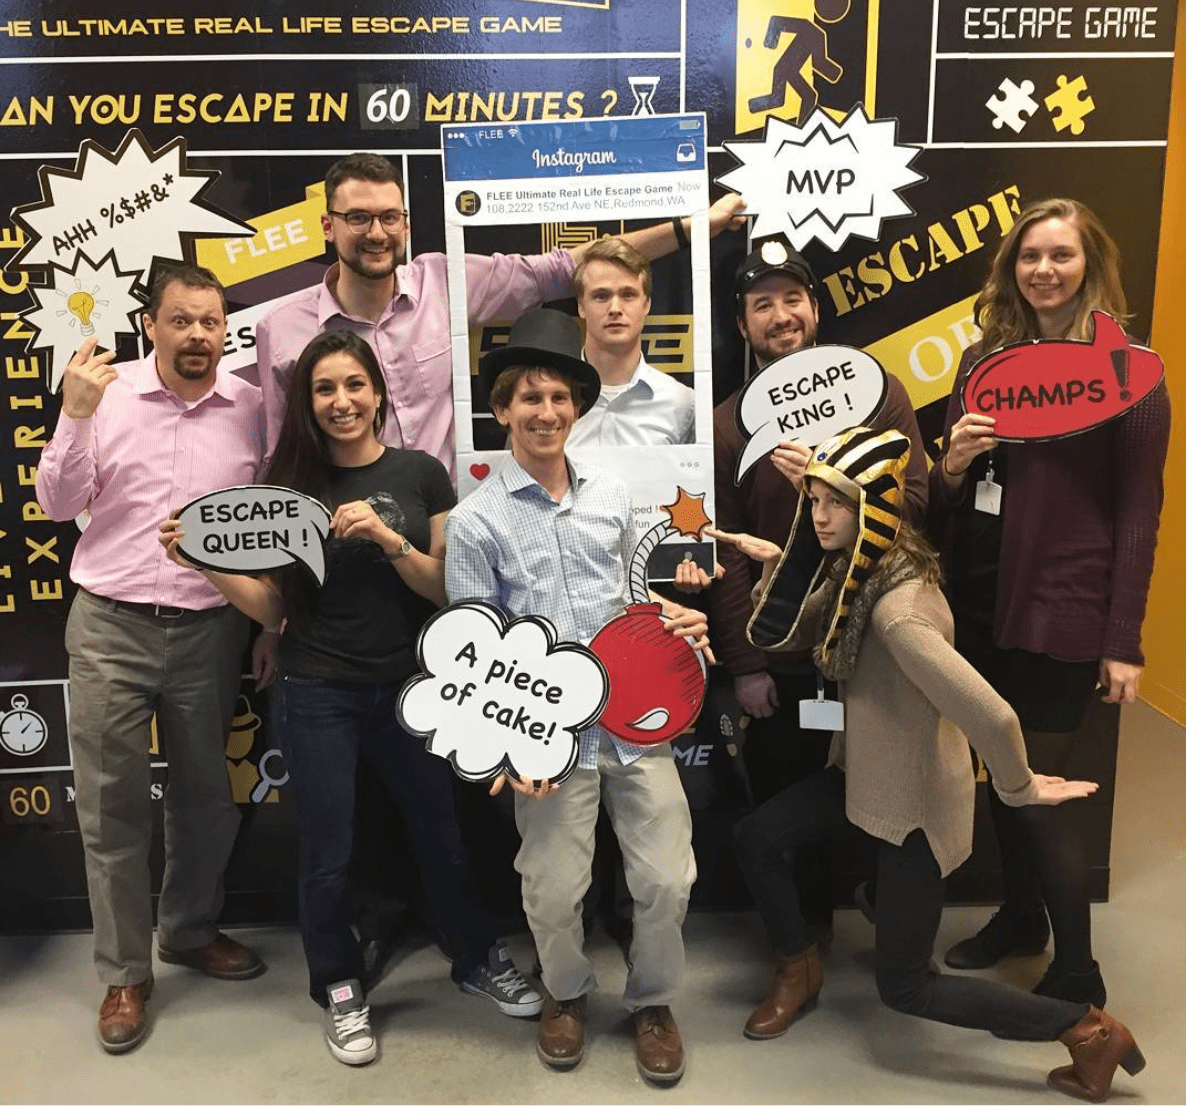 Group of people holding signs after completing an escape room